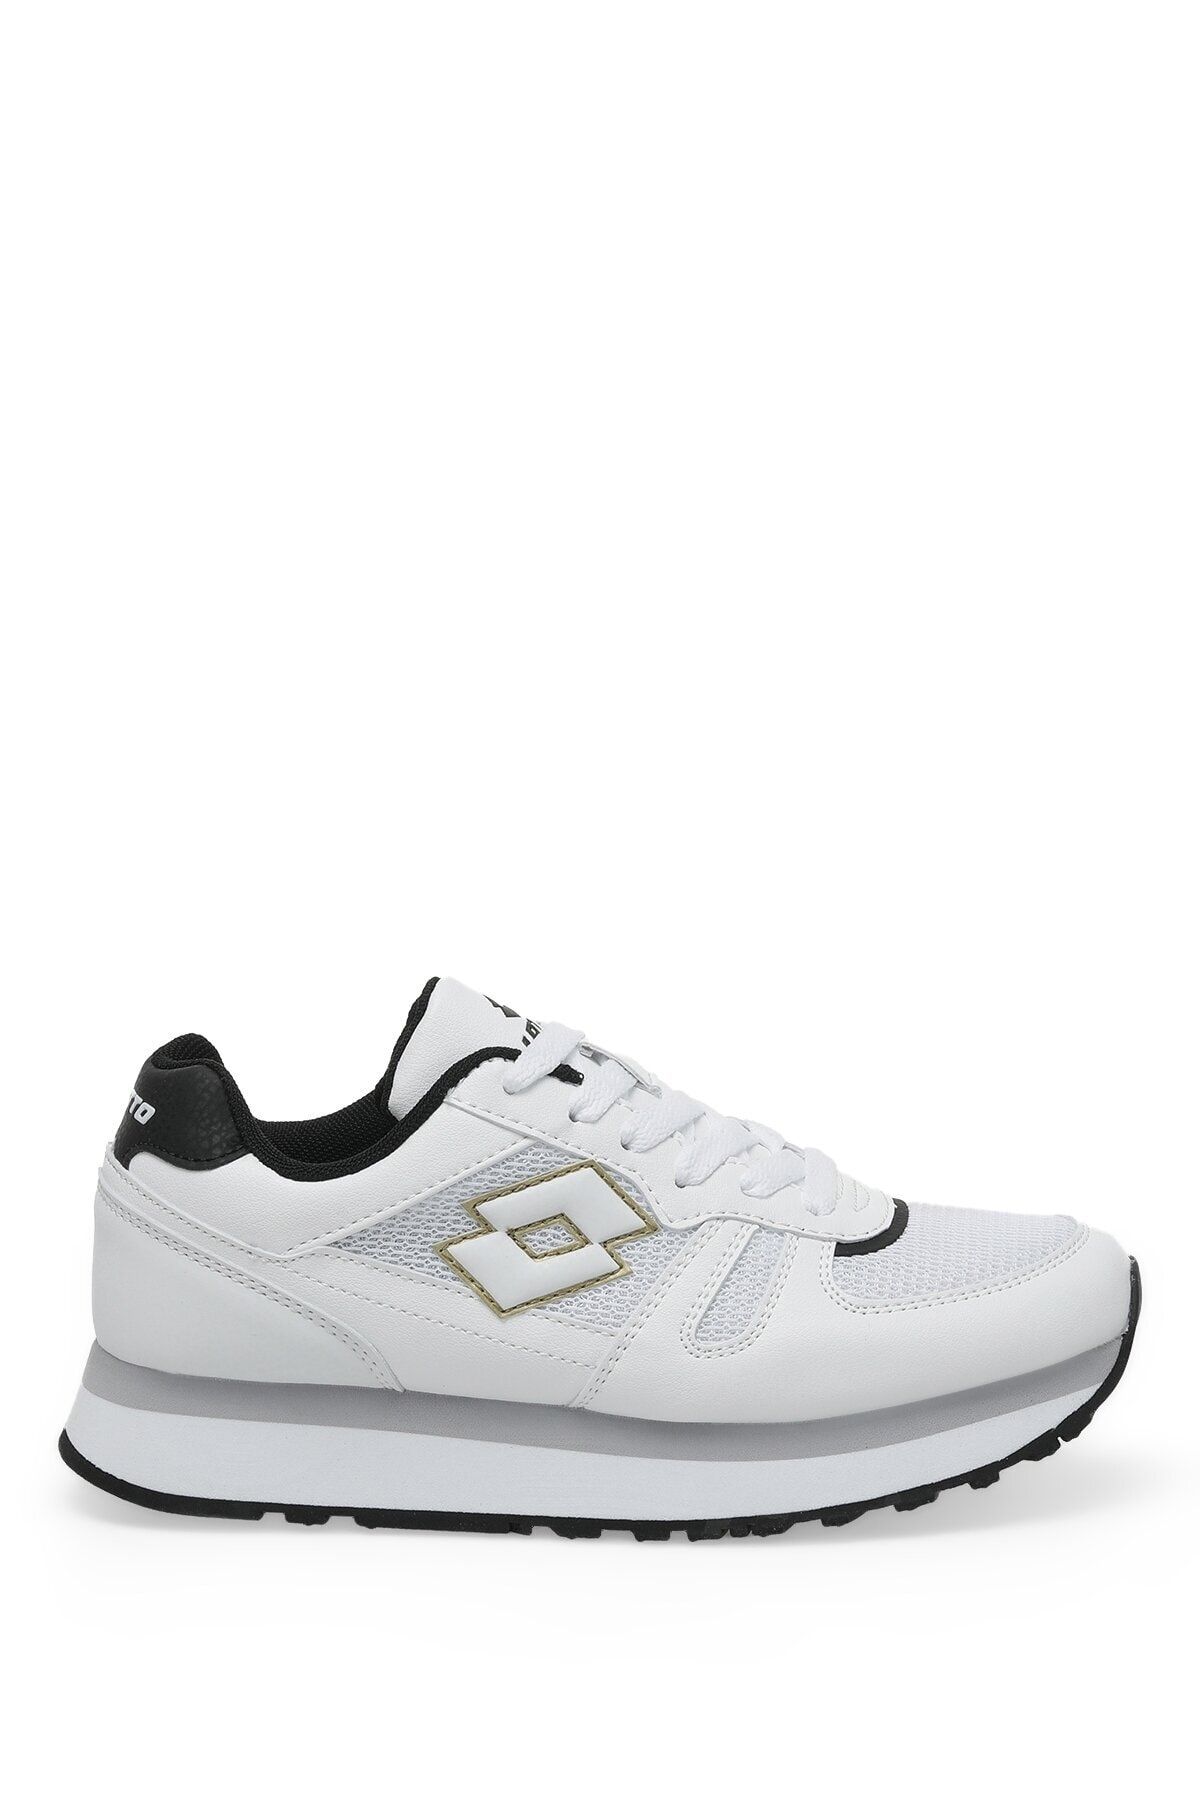 Express Hub - Lotto White Casual Lifestyle Shoe for Men